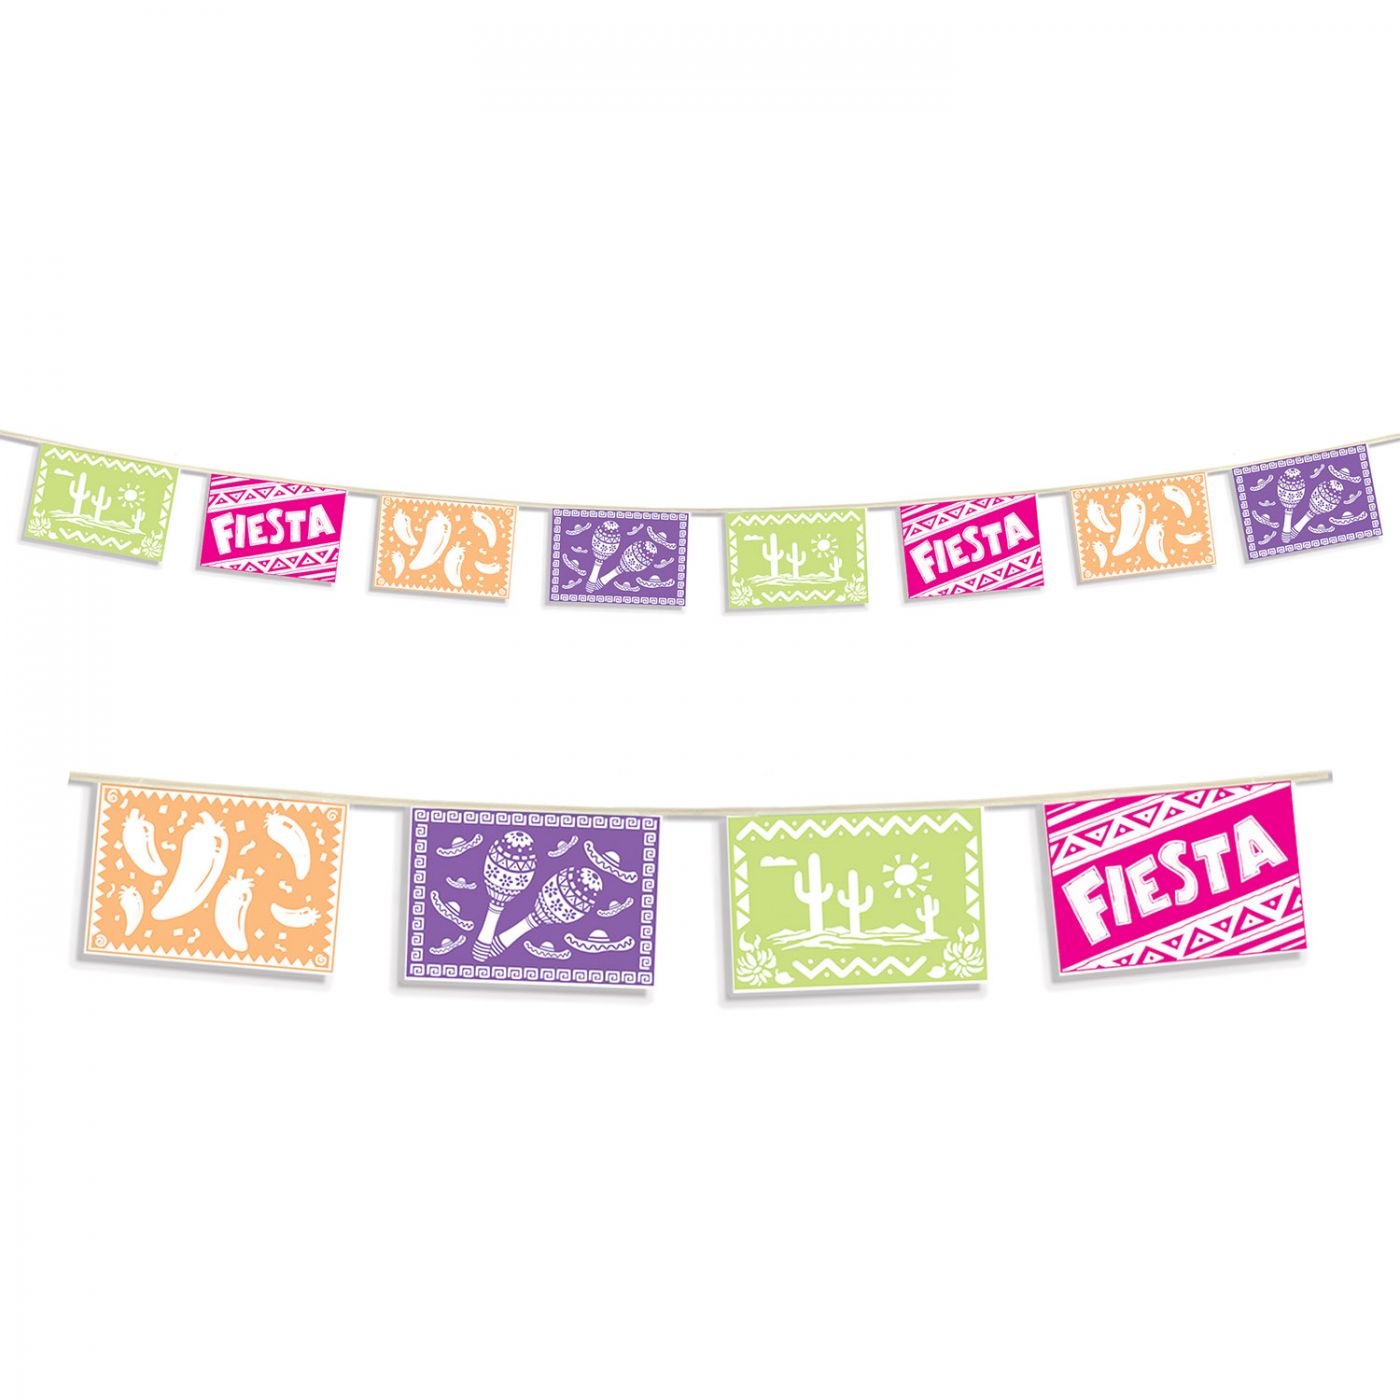 Fiesta Picado Style Pennant Banner image